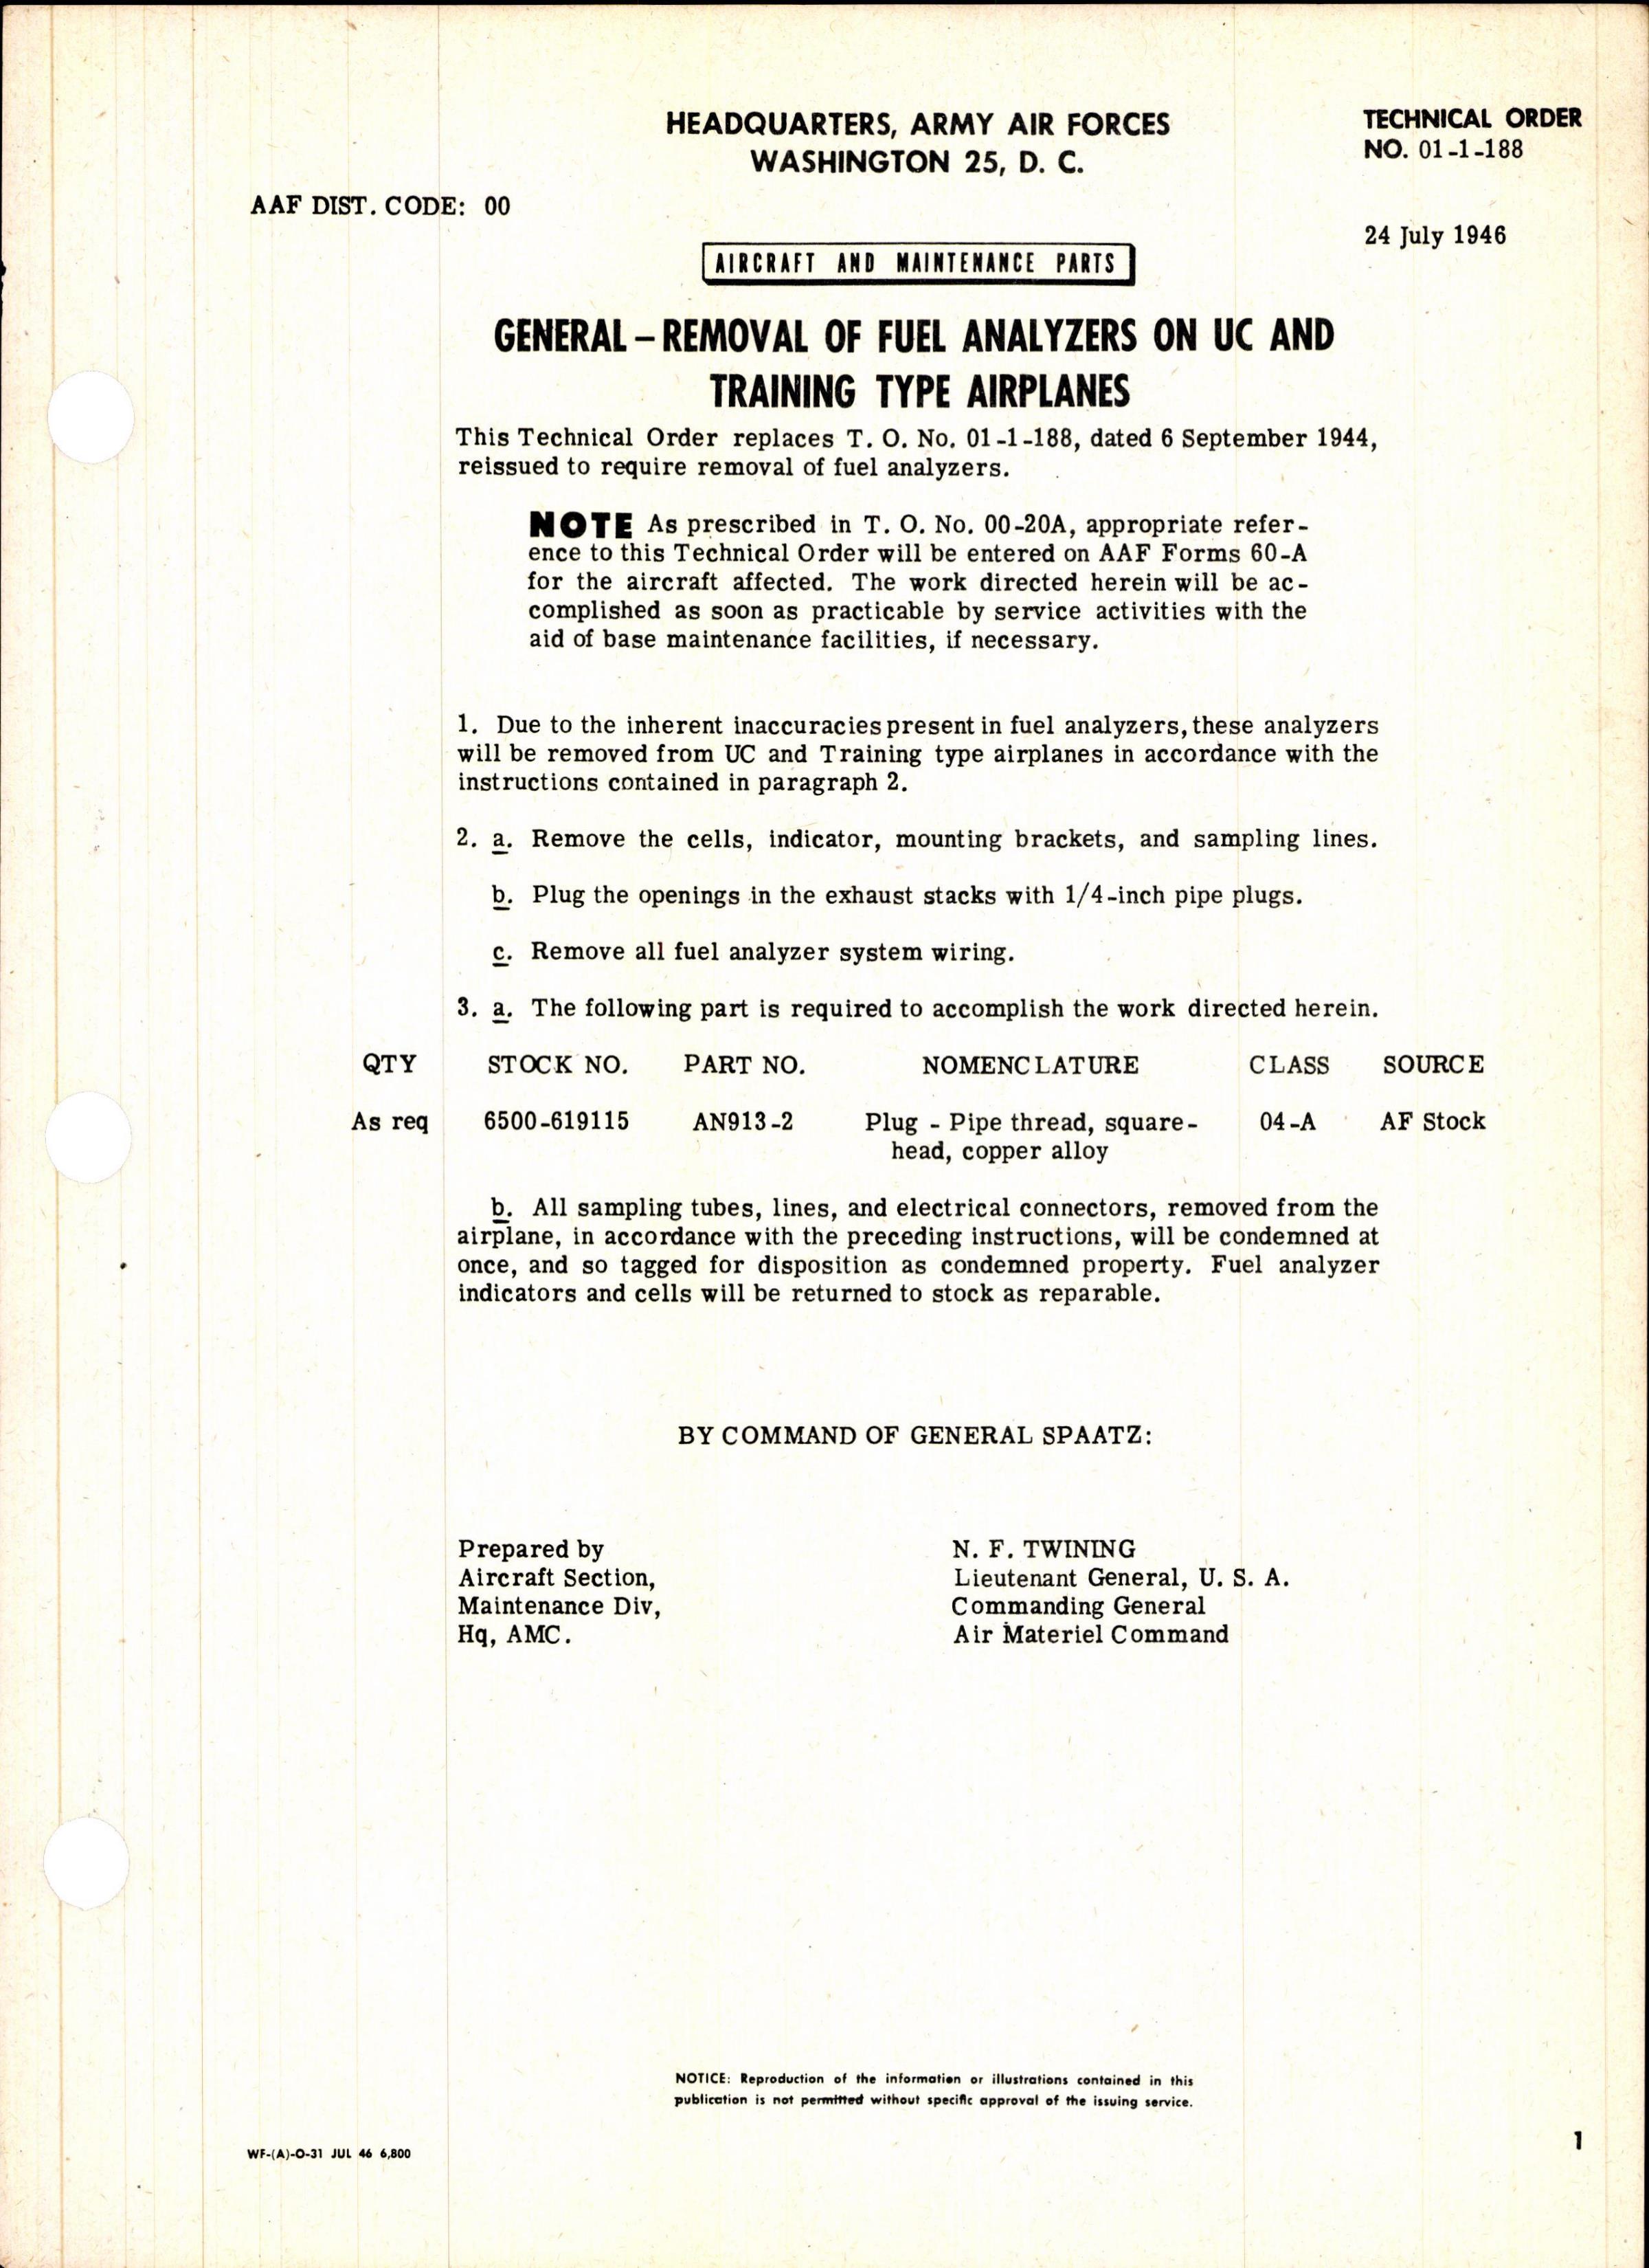 Sample page 1 from AirCorps Library document: Removal of Fuel Analyzers on UC and Training Type Airplanes